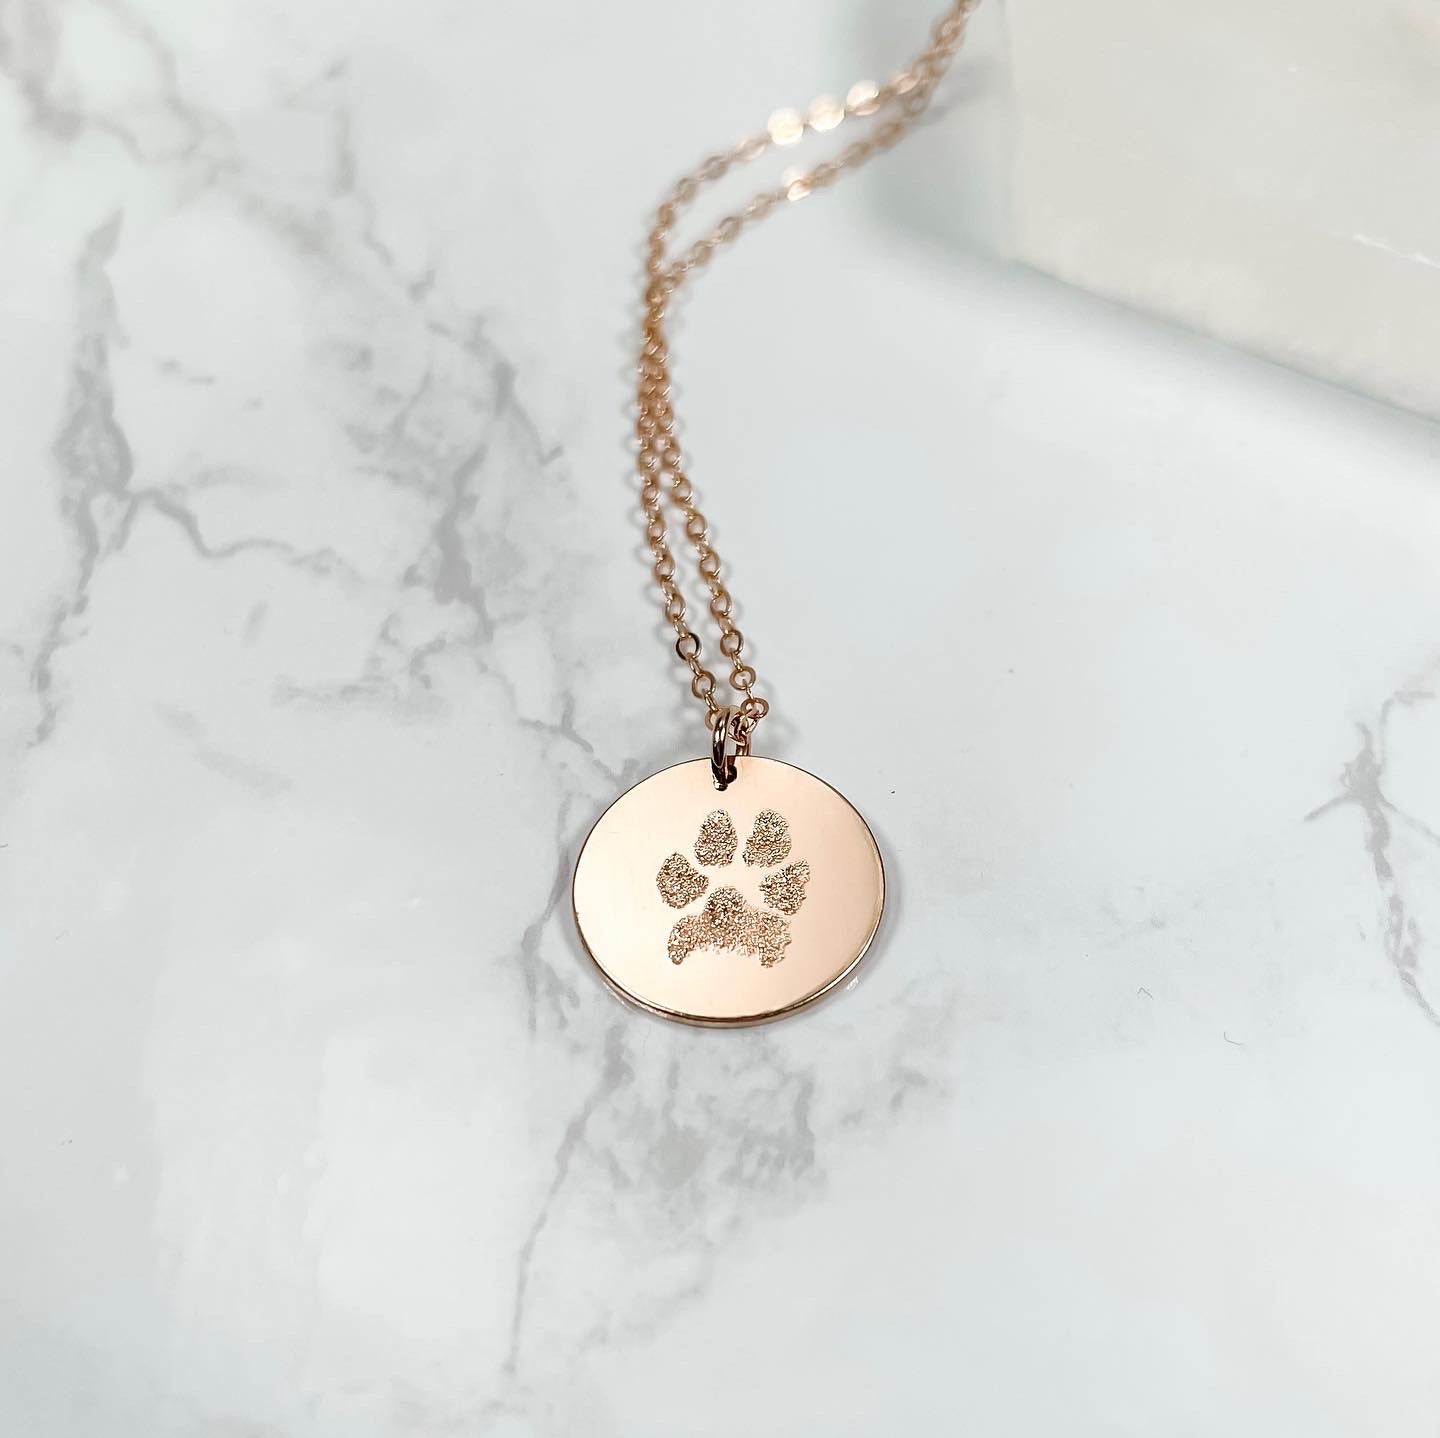 Sterling Silver Paw Print Pebble Pendant Necklace | The British Craft House